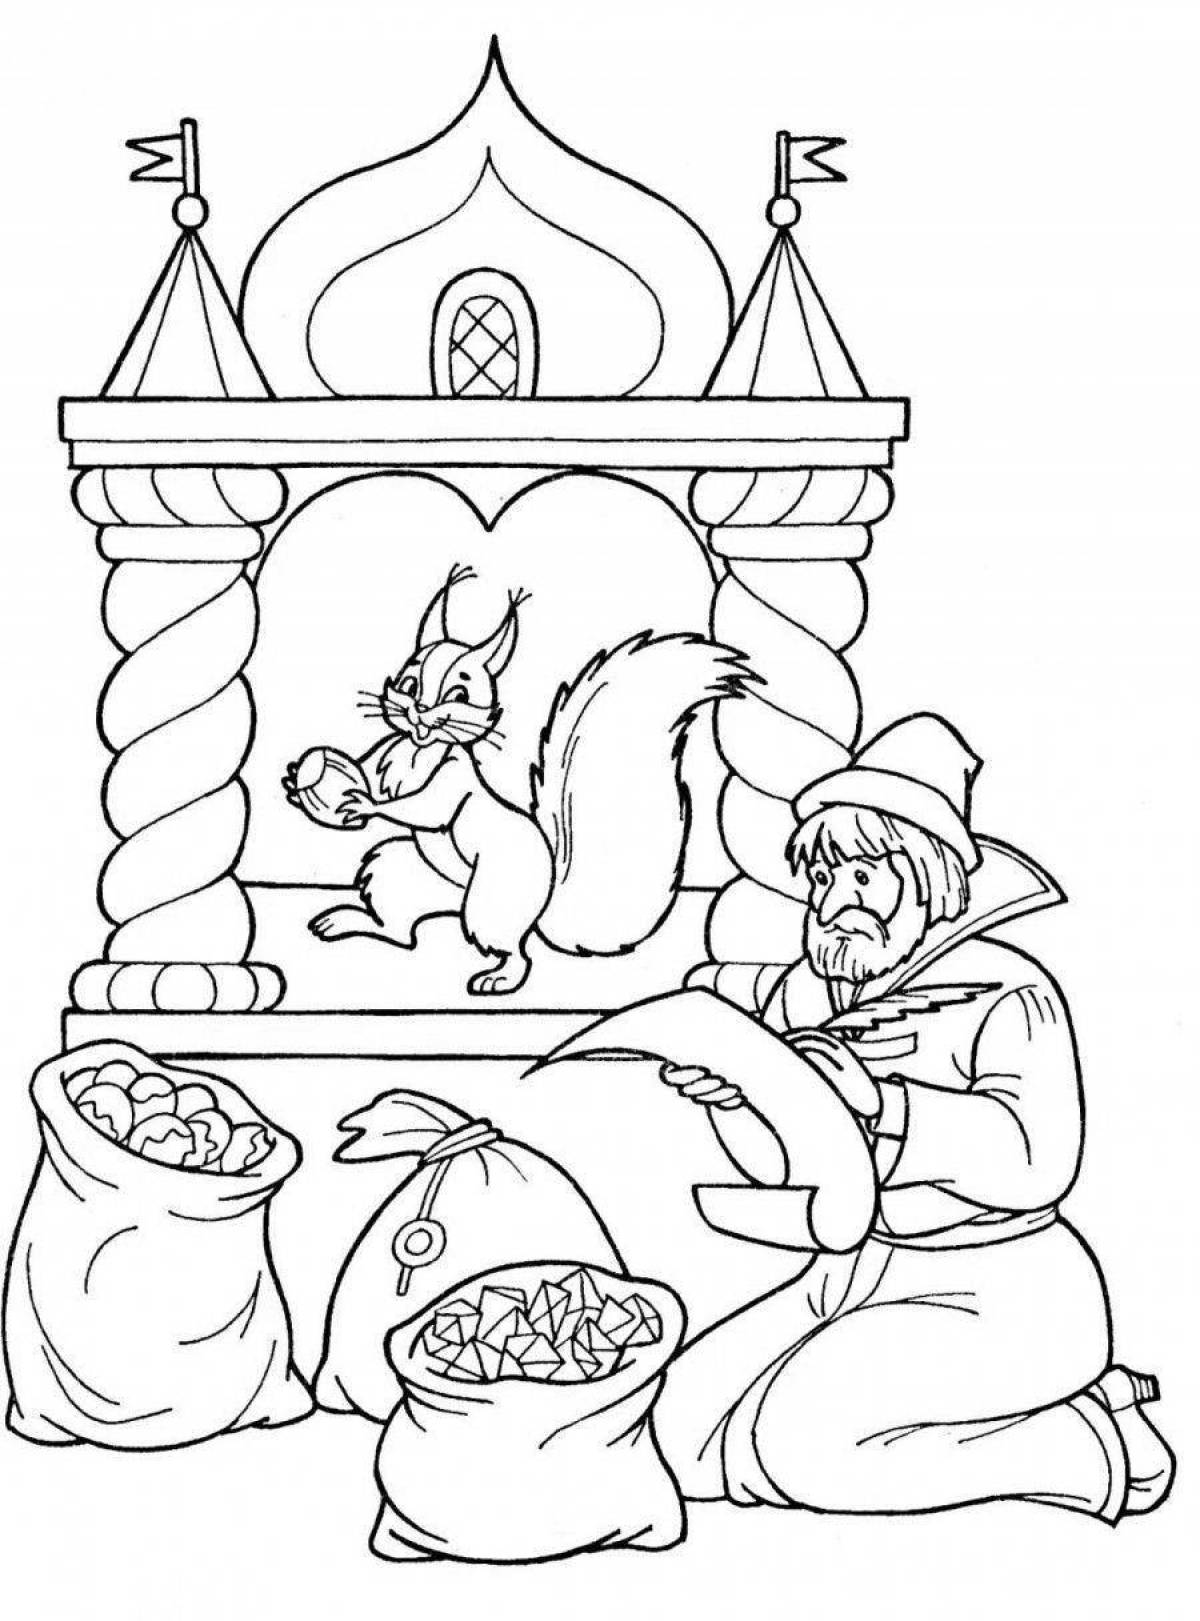 Coloring book based on Pushkin's fairy tales